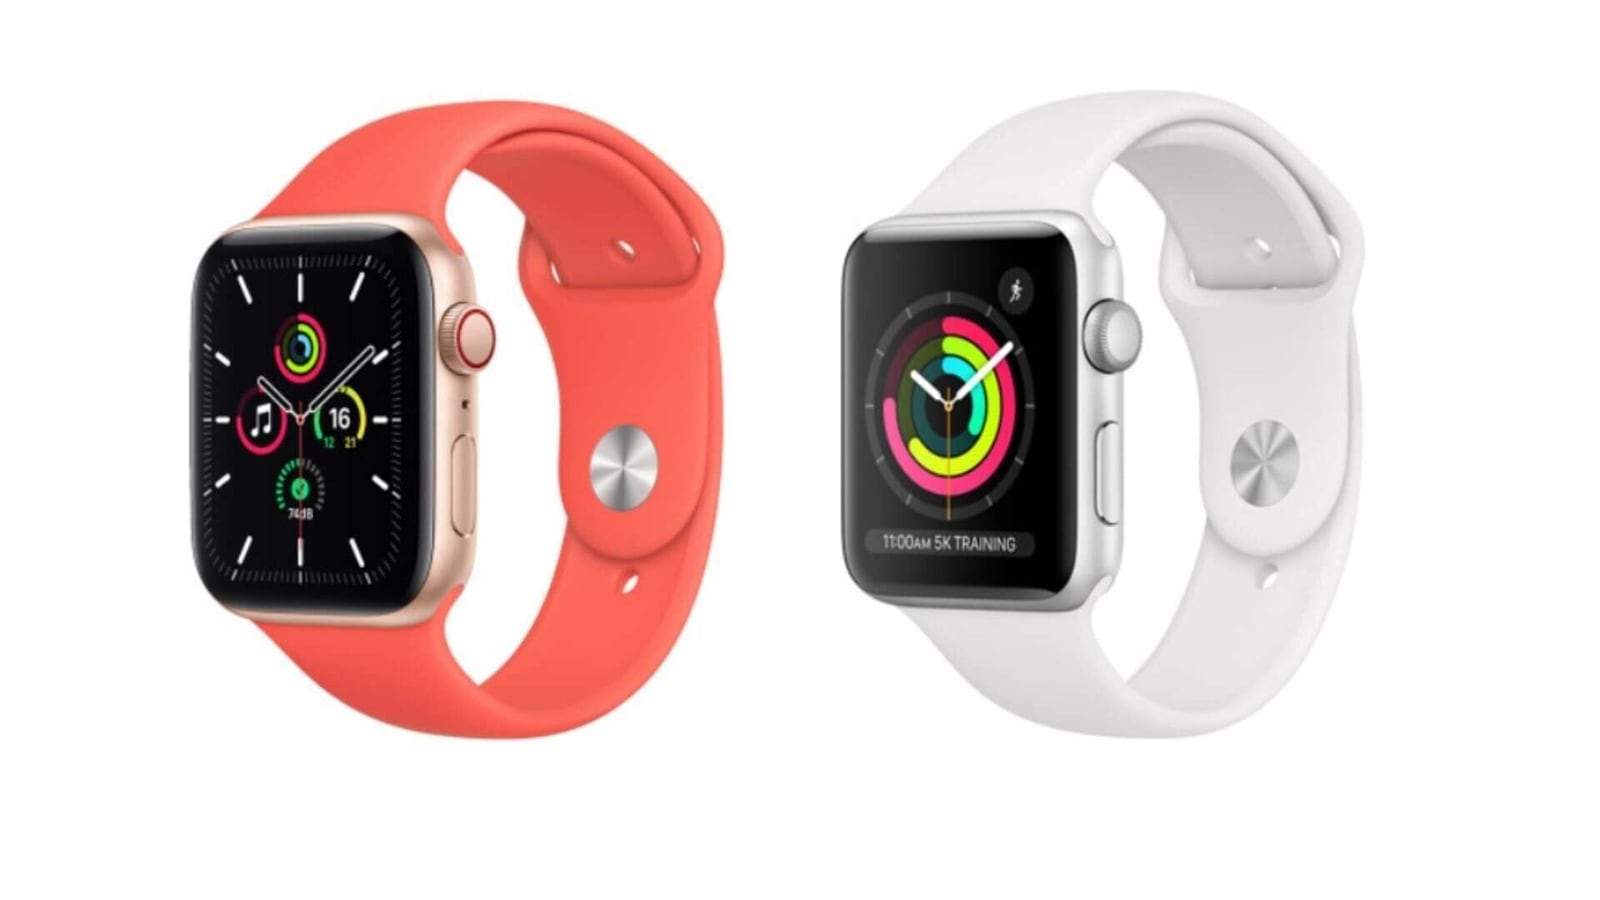 Apple Watch SE vs Series 3: Which one should you go for?